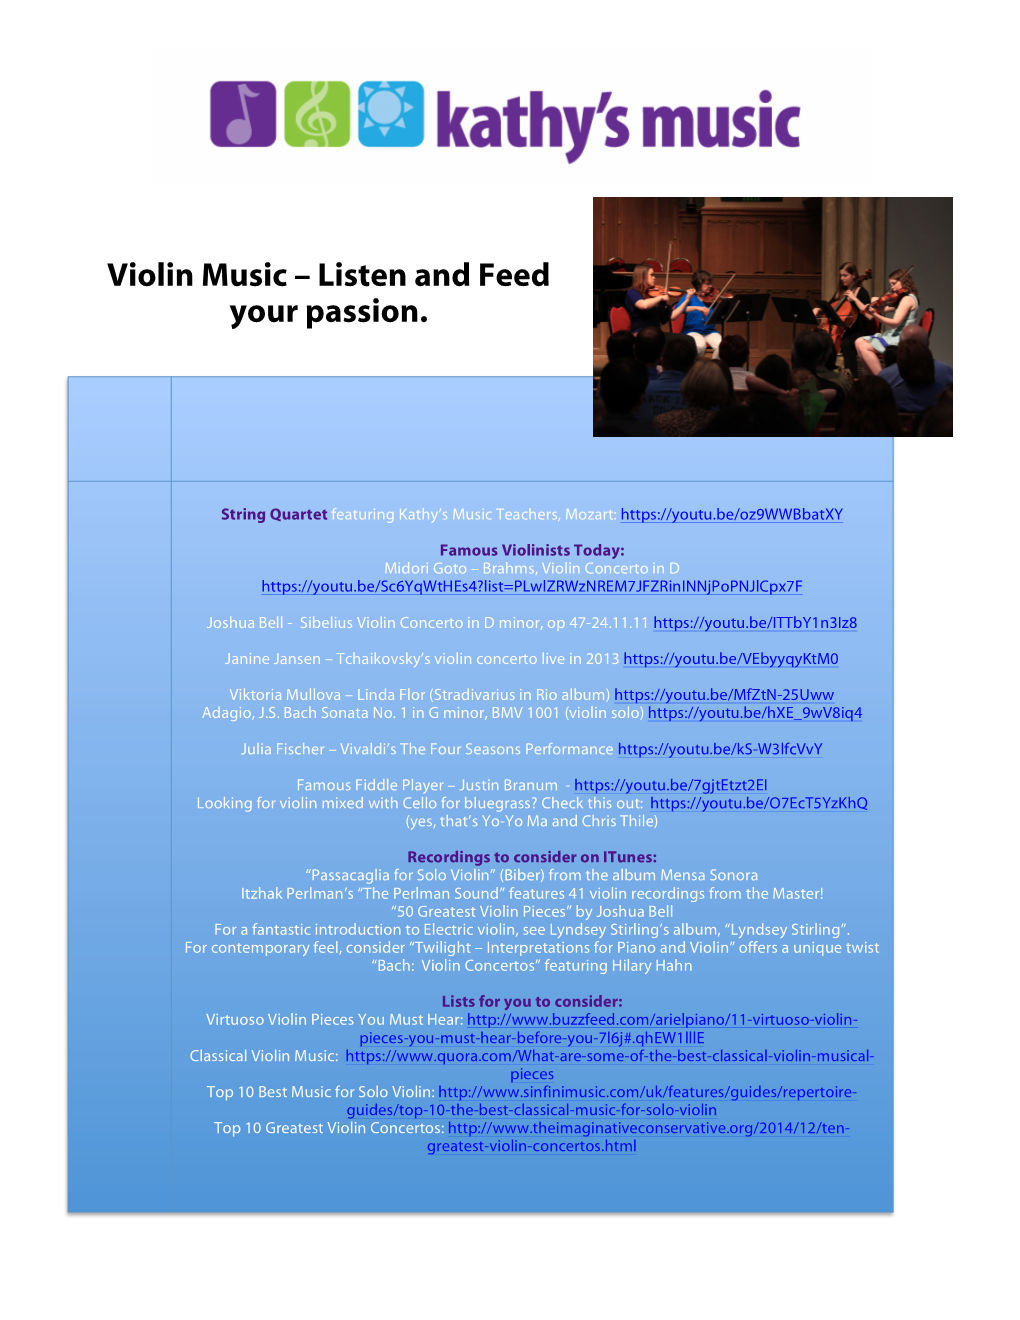 Violin Music – Listen and Feed Your Passion